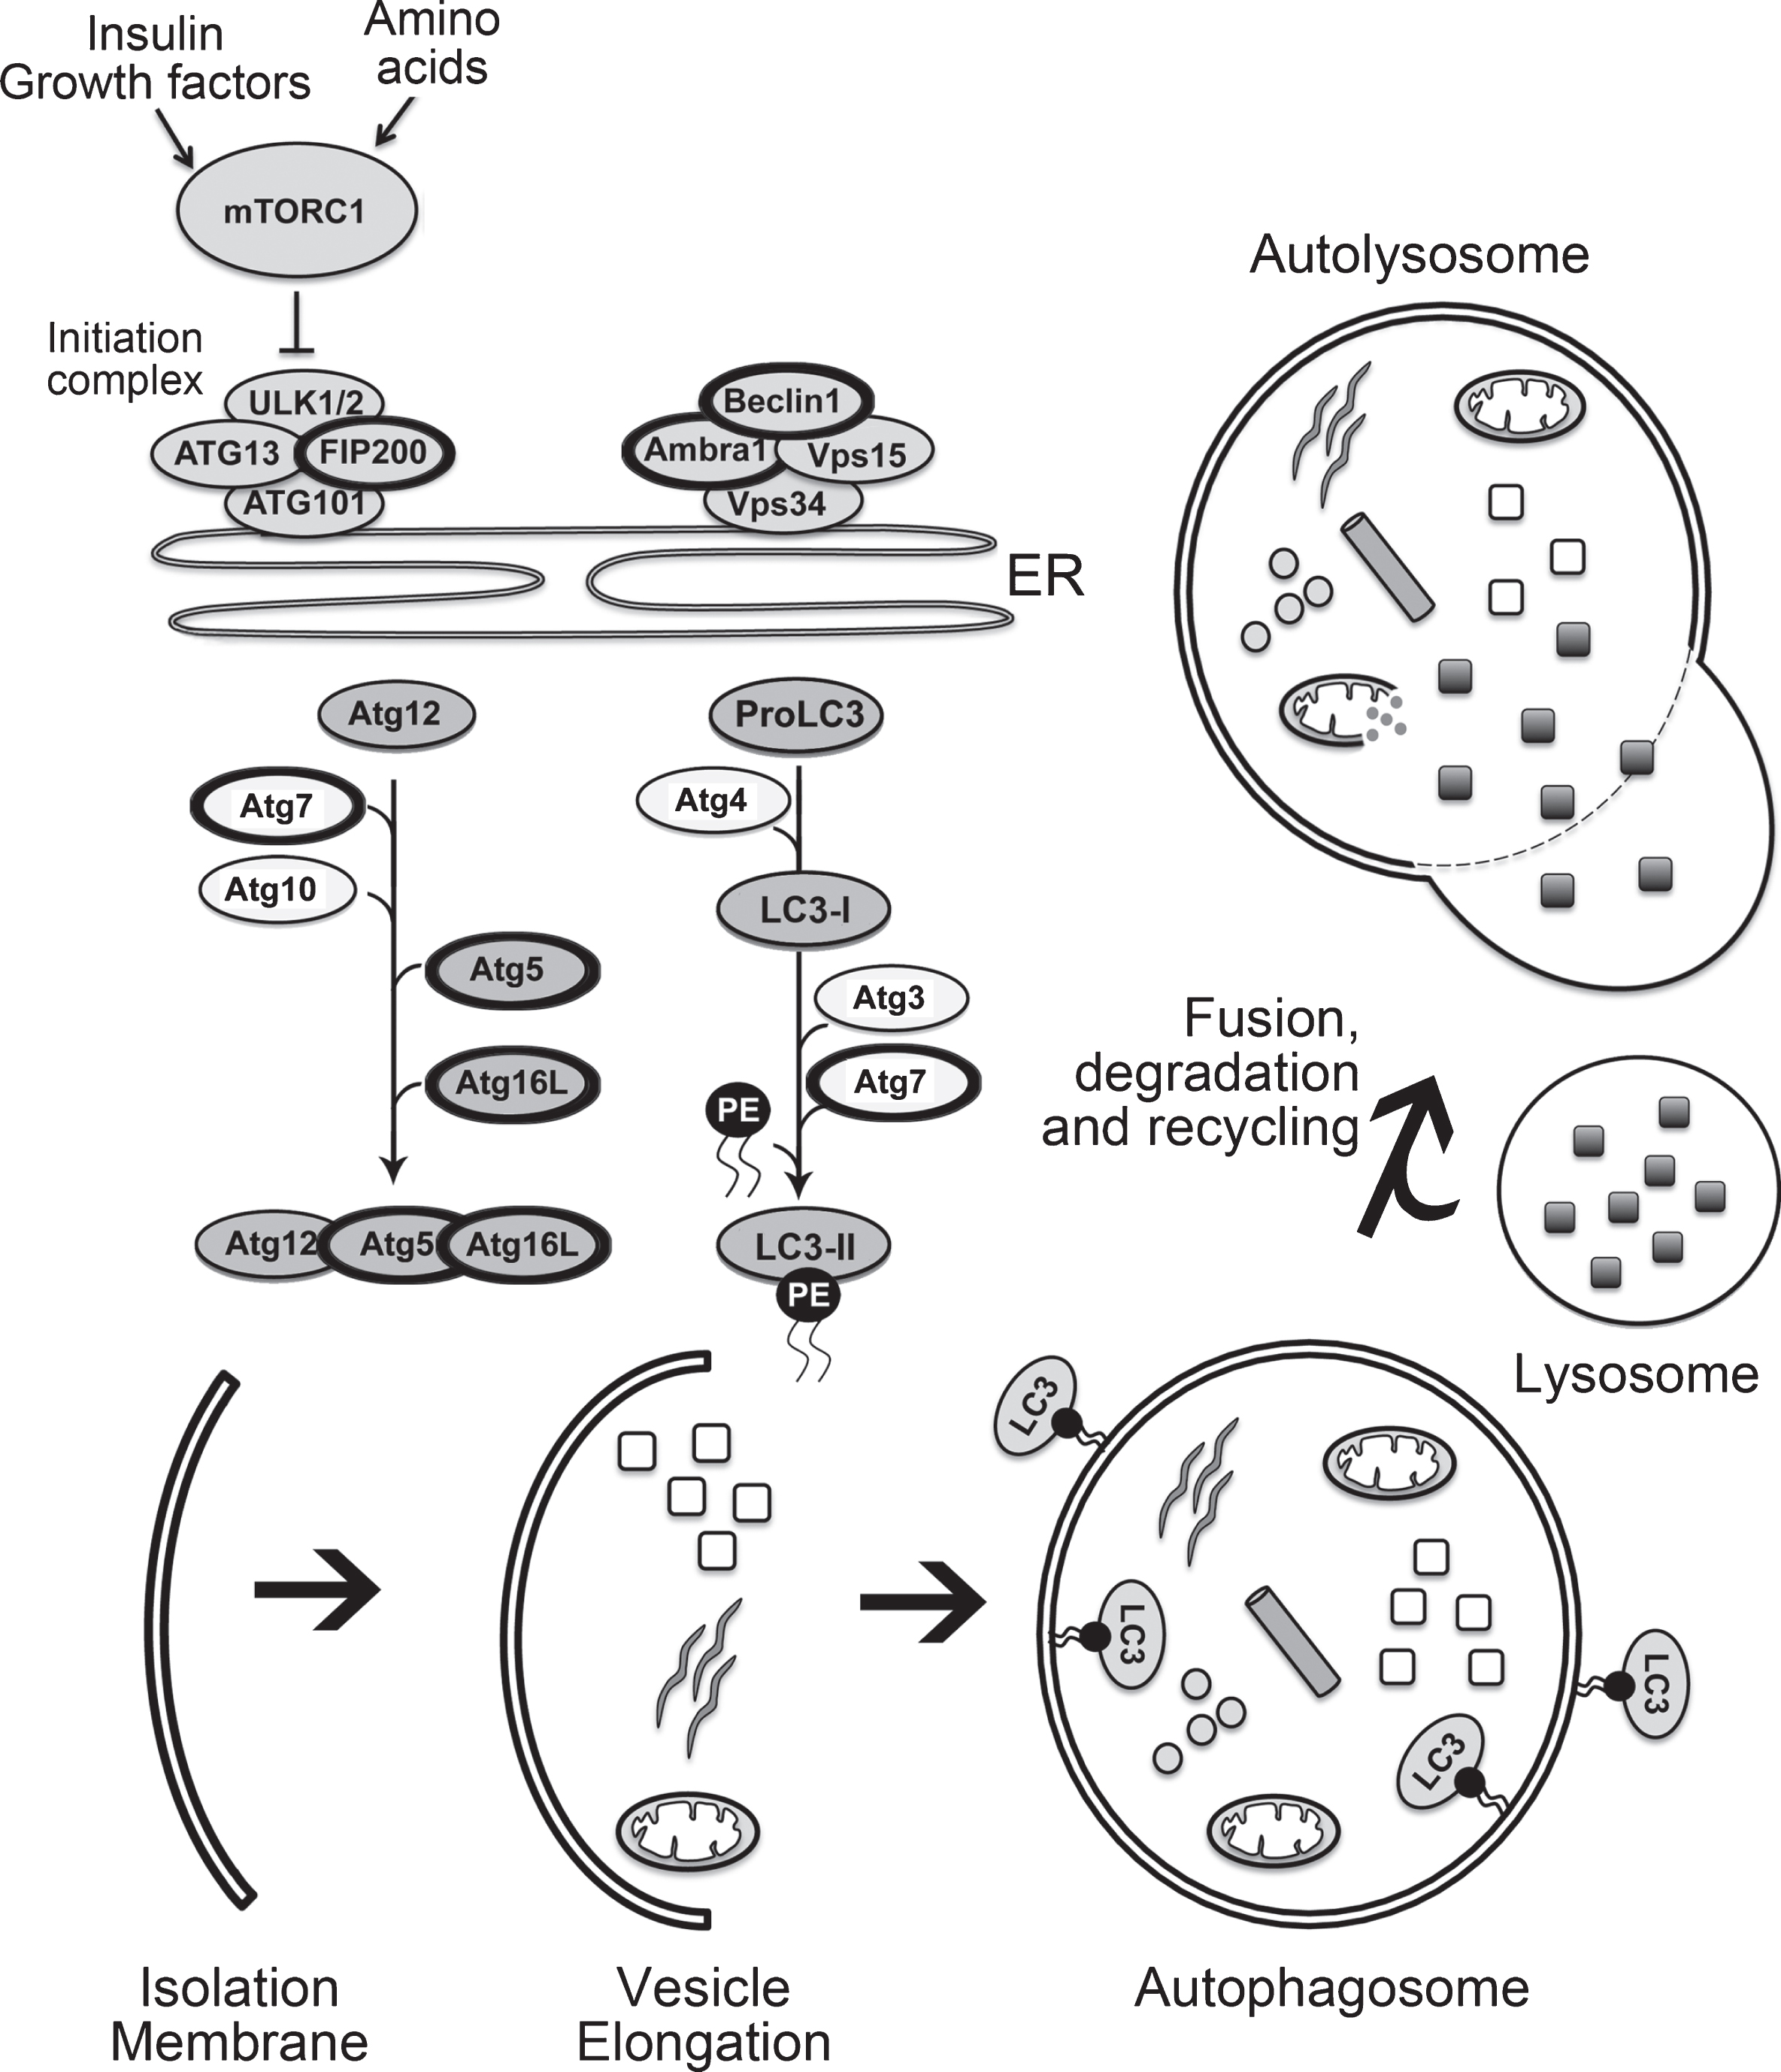 The mammalian autophagy pathway. The key steps involved in autophagy and critical members of the autophagy pathway are illustrated. The members of the autophagy pathway that have thicker black circles are those that have been studied in relation to autophagy and adult neurogenesis, as listed in Table 2, and described within the text.